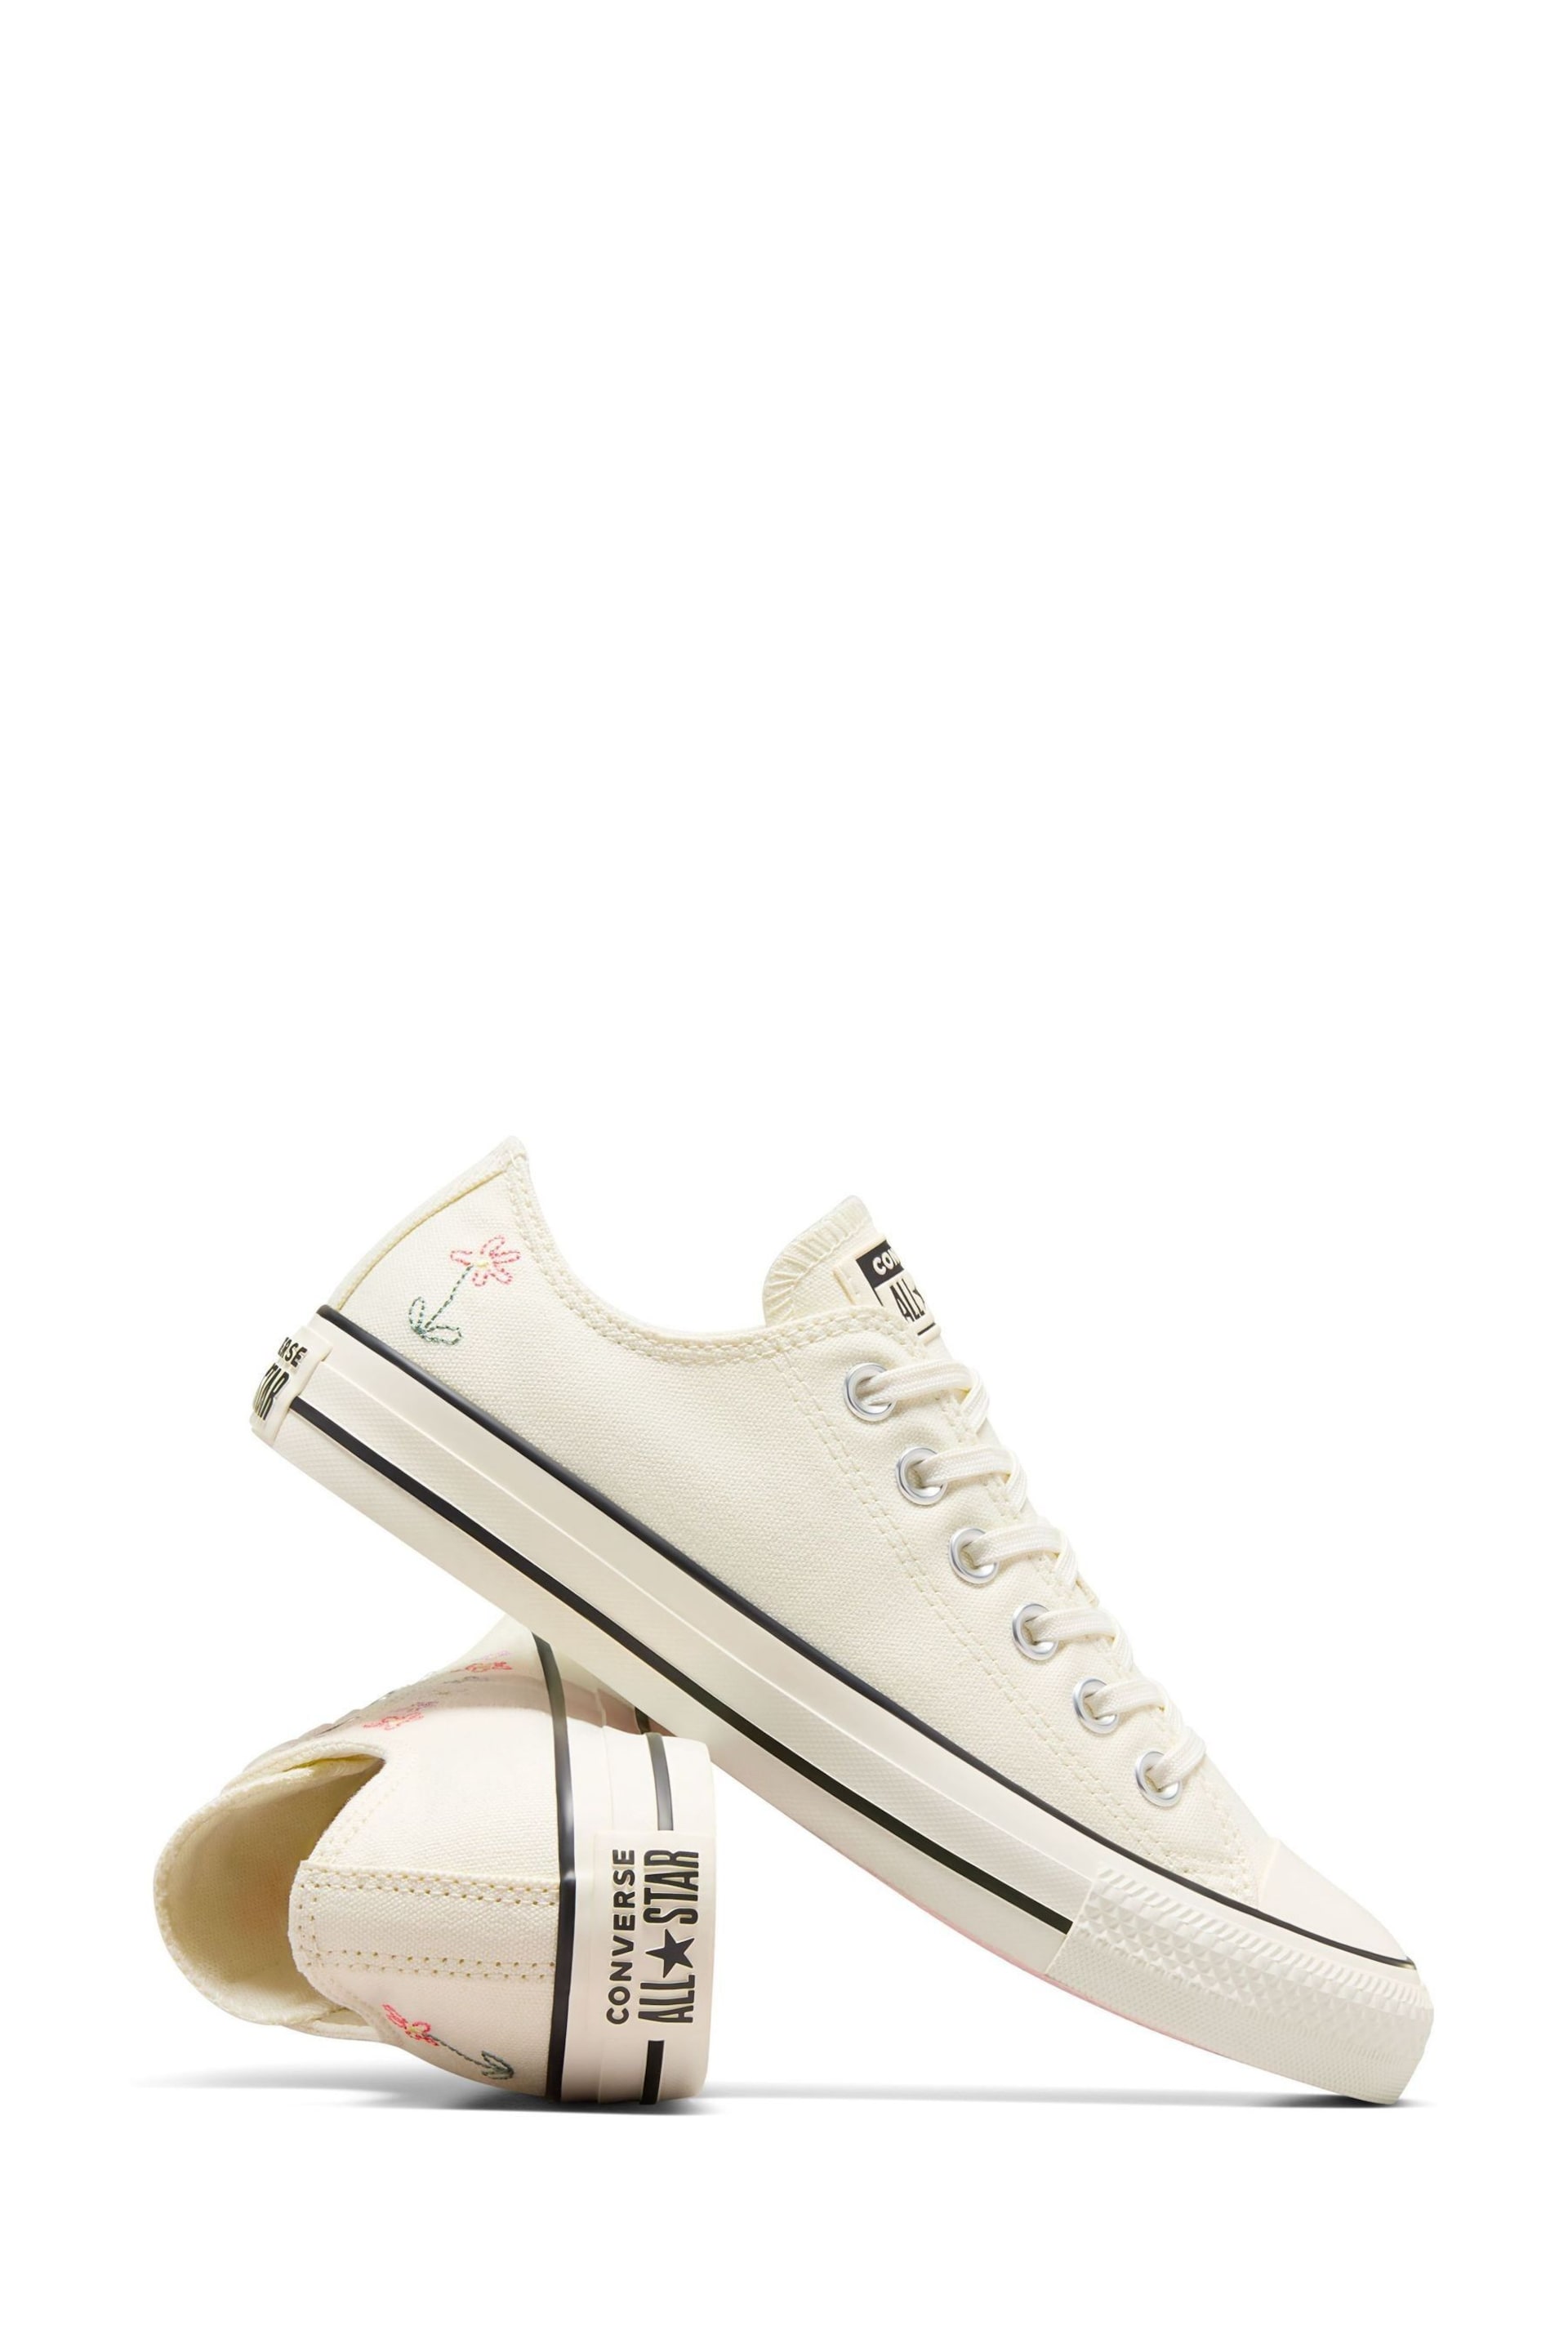 Converse Cream Chuck Taylor All Star Ox Trainers - Image 10 of 11